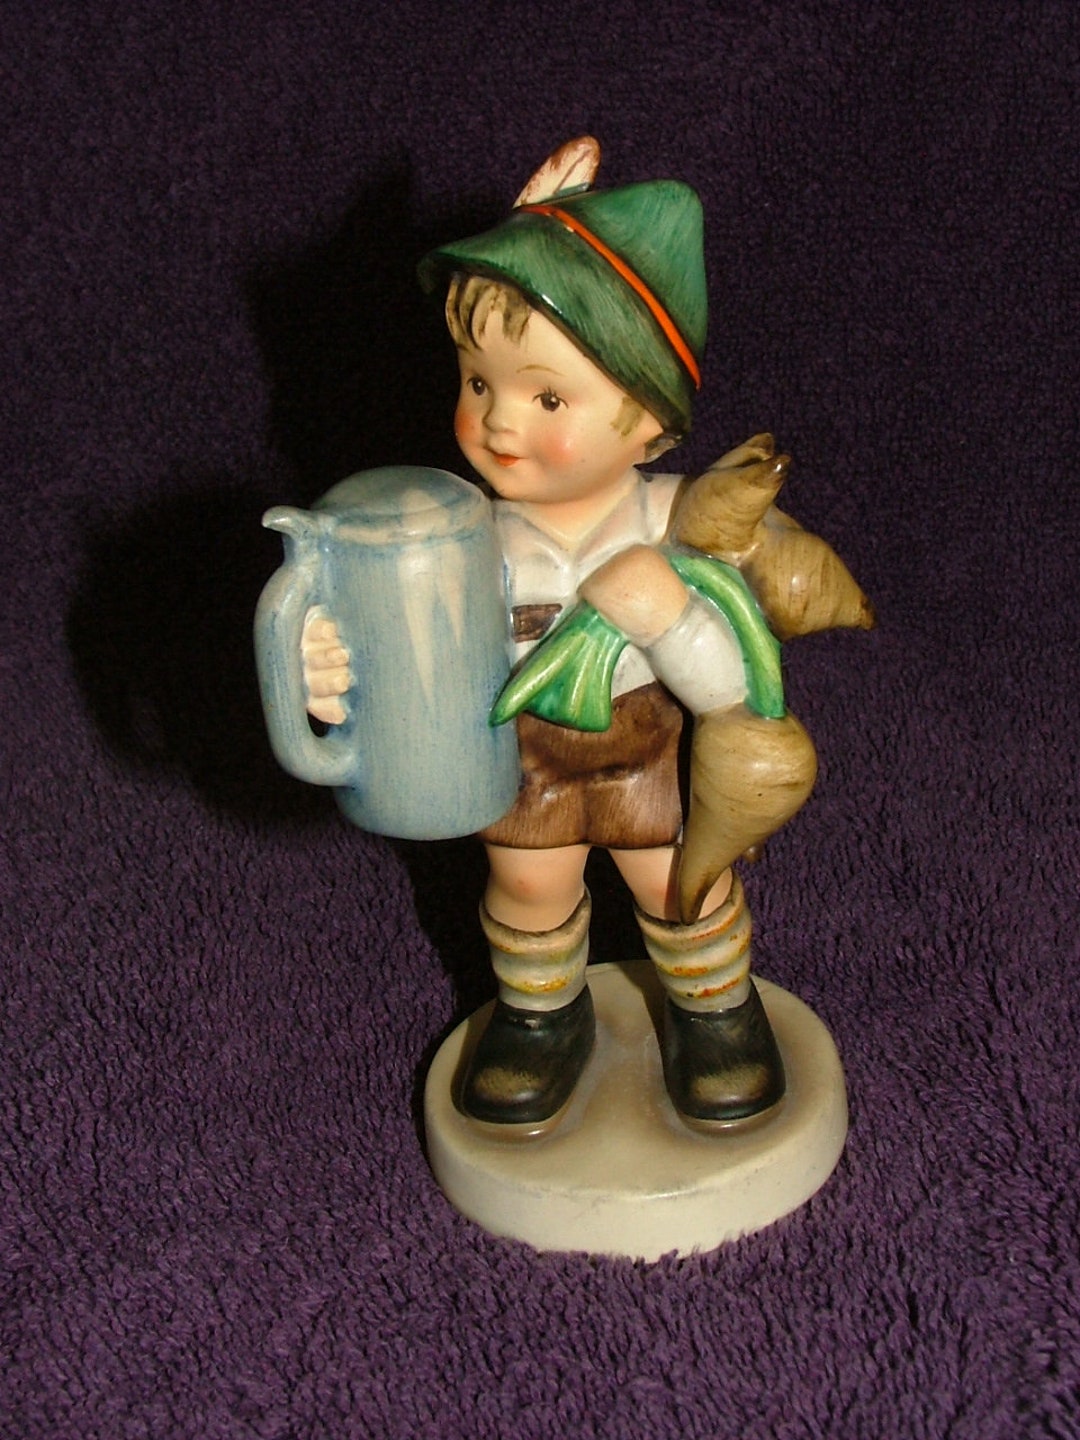 Hummel Goebel for Father Figurine 87 Boy With Stein and Vegetables Full Bee  TMK2 Vintage Collectible 